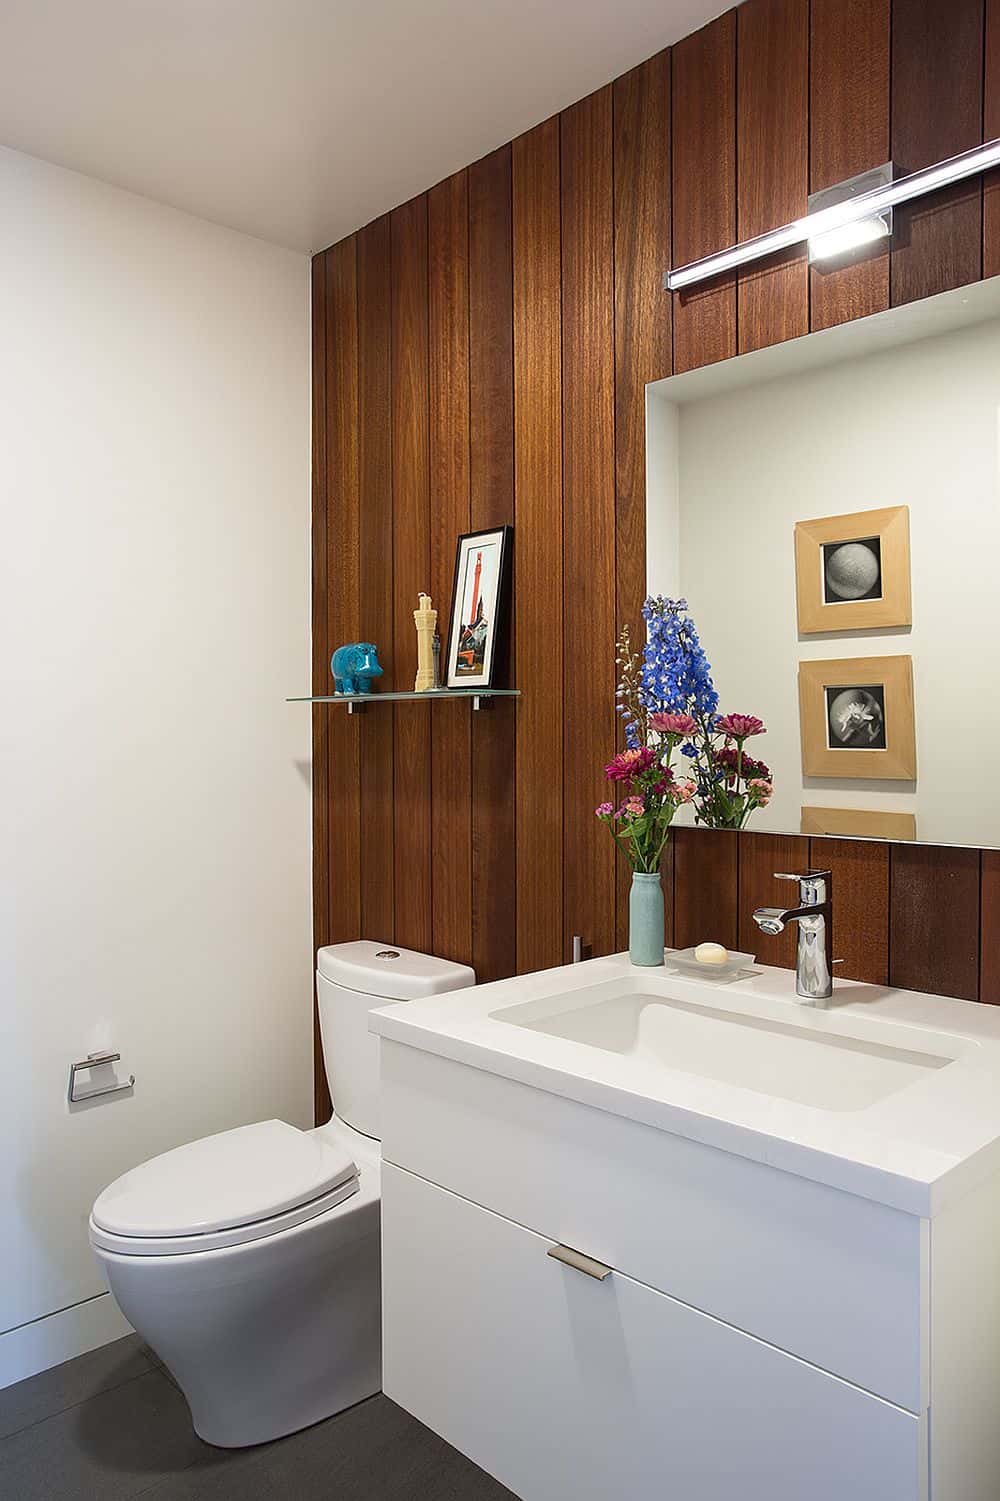 In the bathroom Mahogany wood panels contrast with white furnishings